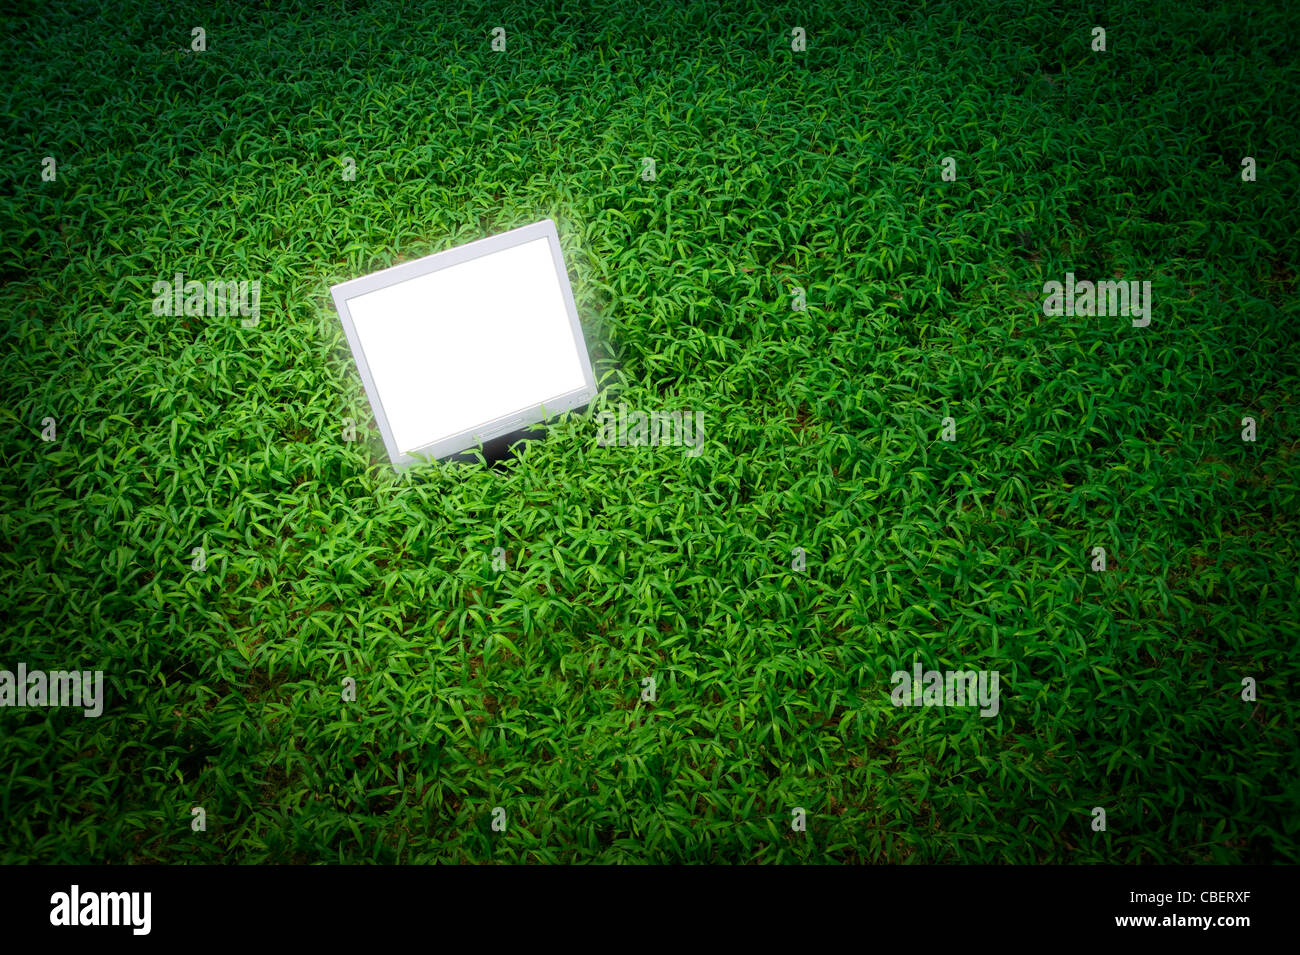 Computer Screen Outside In Grassy Field Stock Photo